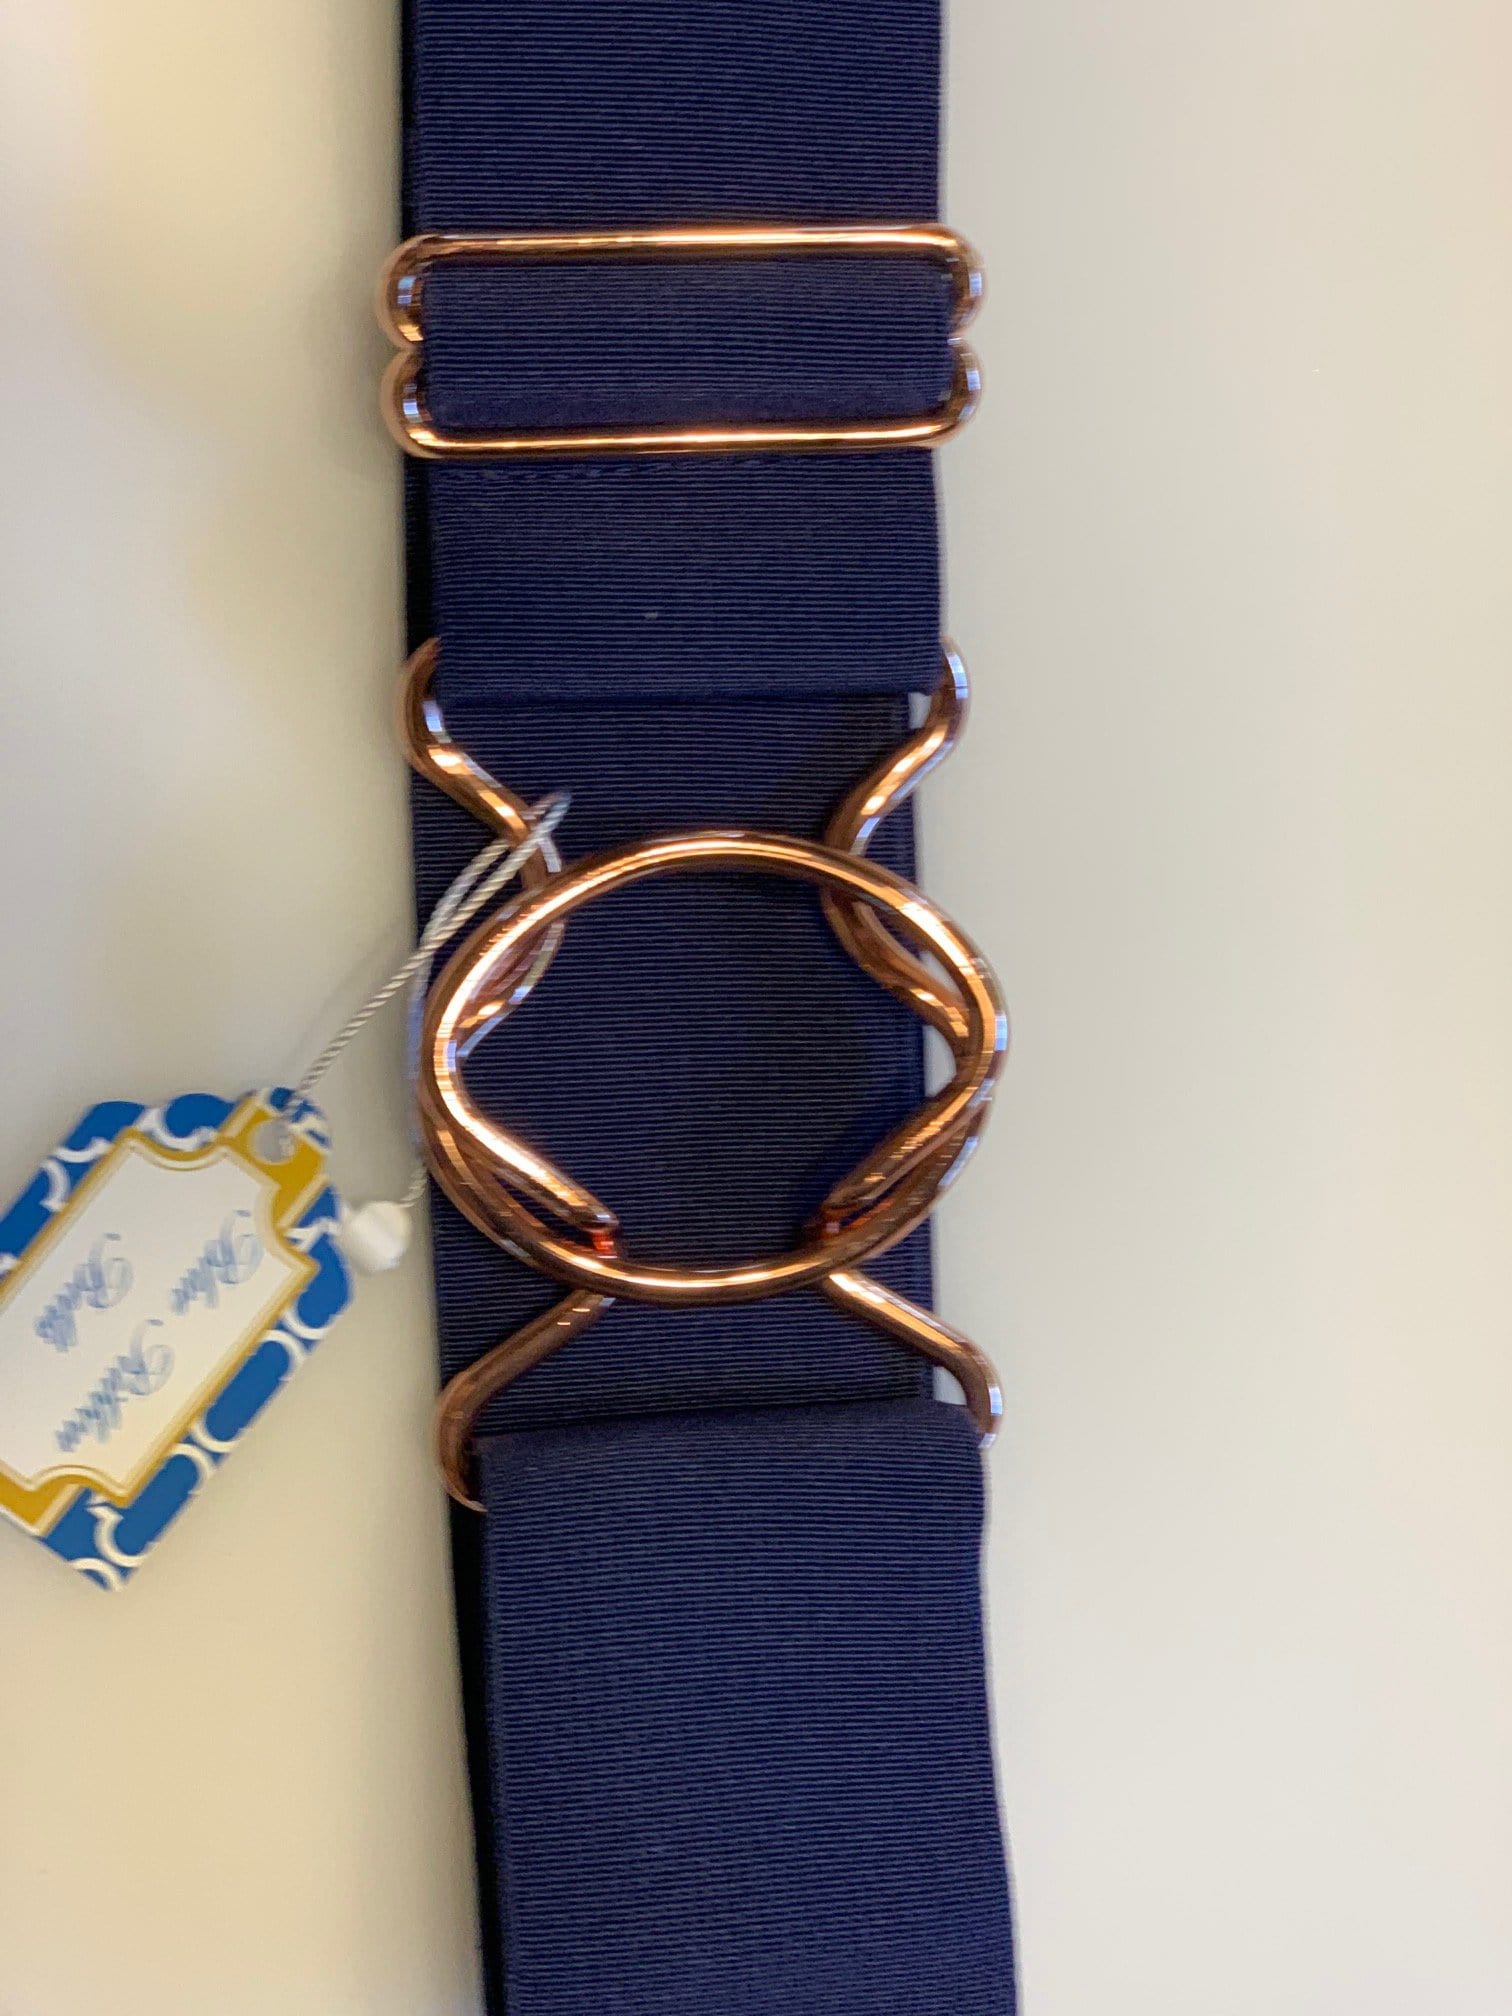 Blue Ribbon Belts Belt Navy with Rose Gold Buckle Blue Ribbon Belts - 2 Inch equestrian team apparel online tack store mobile tack store custom farm apparel custom show stable clothing equestrian lifestyle horse show clothing riding clothes horses equestrian tack store